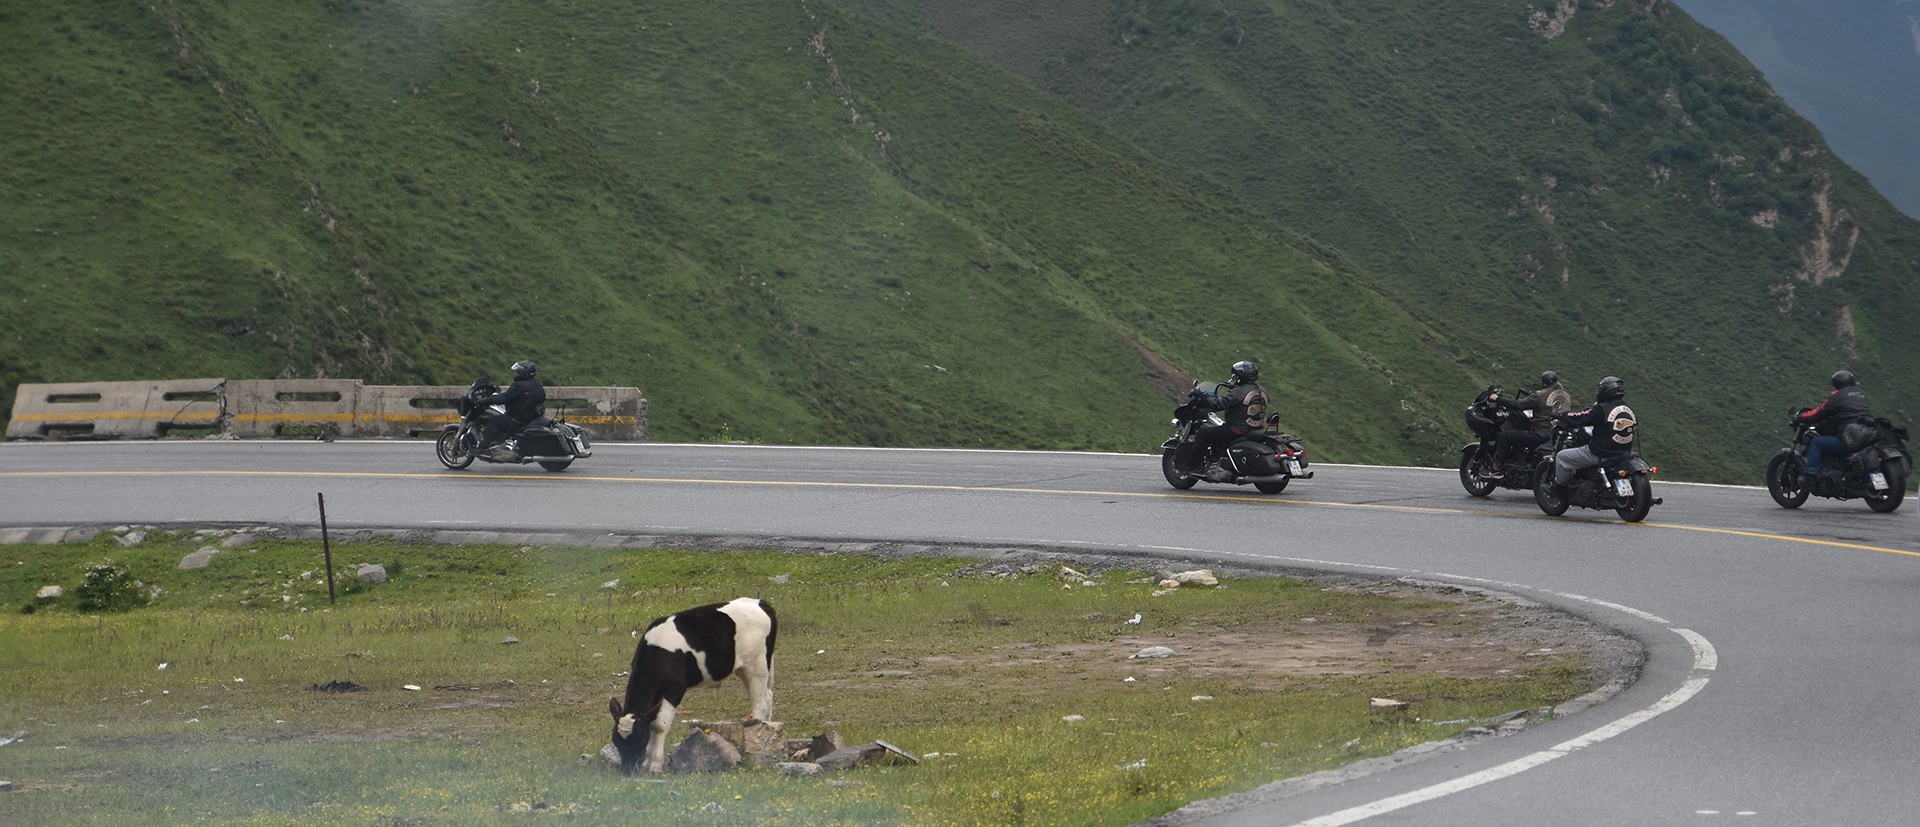 Rental Motorbike Tour from Sichuan to Tibet on G318 Highway